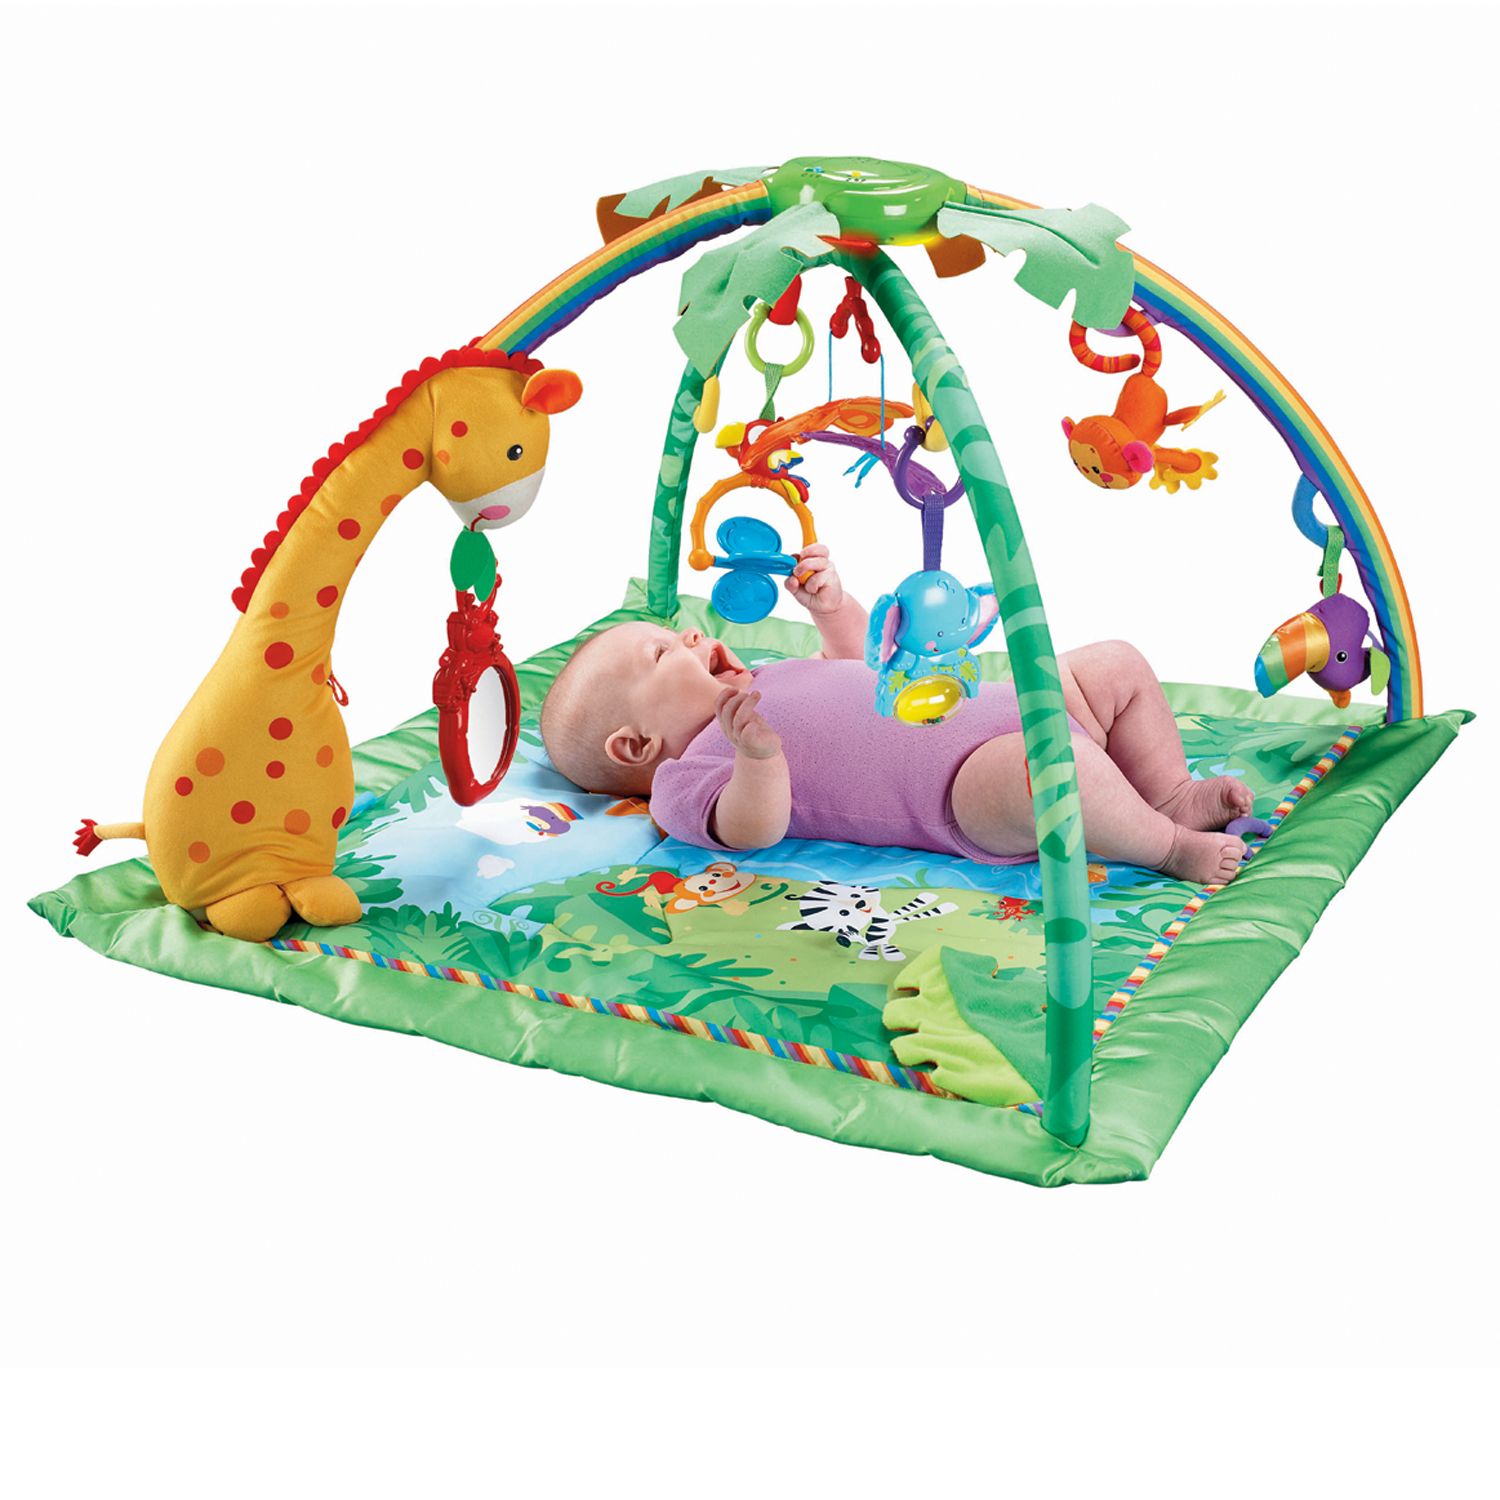 fisher price deluxe musical play gym